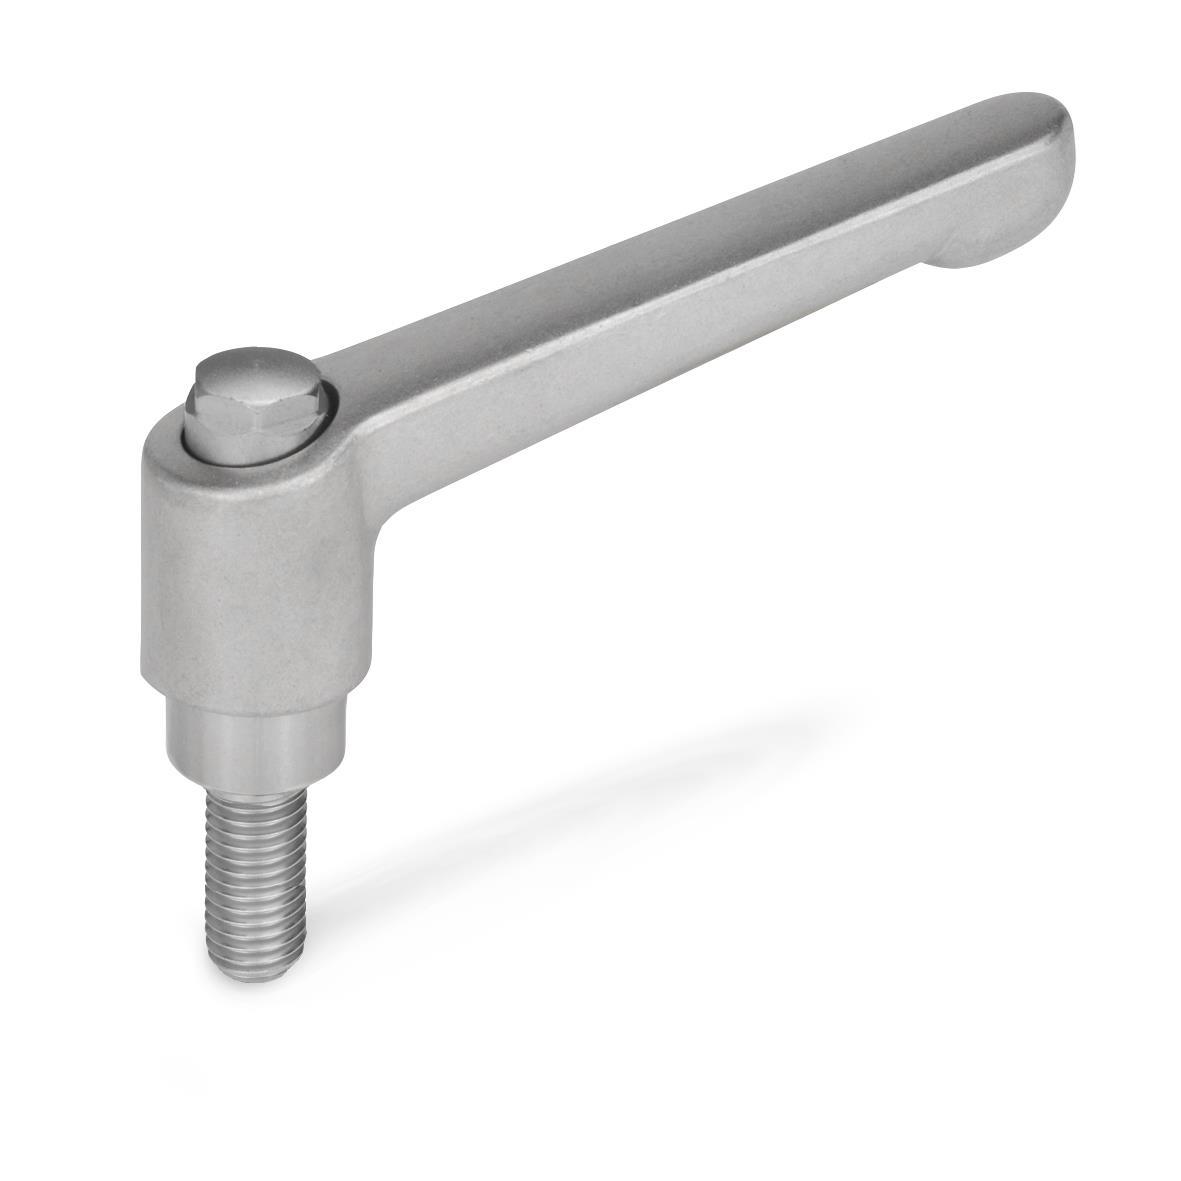 GN 911.3 Adjustable Hand Levers, Stainless Steel , with Threaded Stud,  for Tube Clamp Connectors / Linear Actuator Connectors 